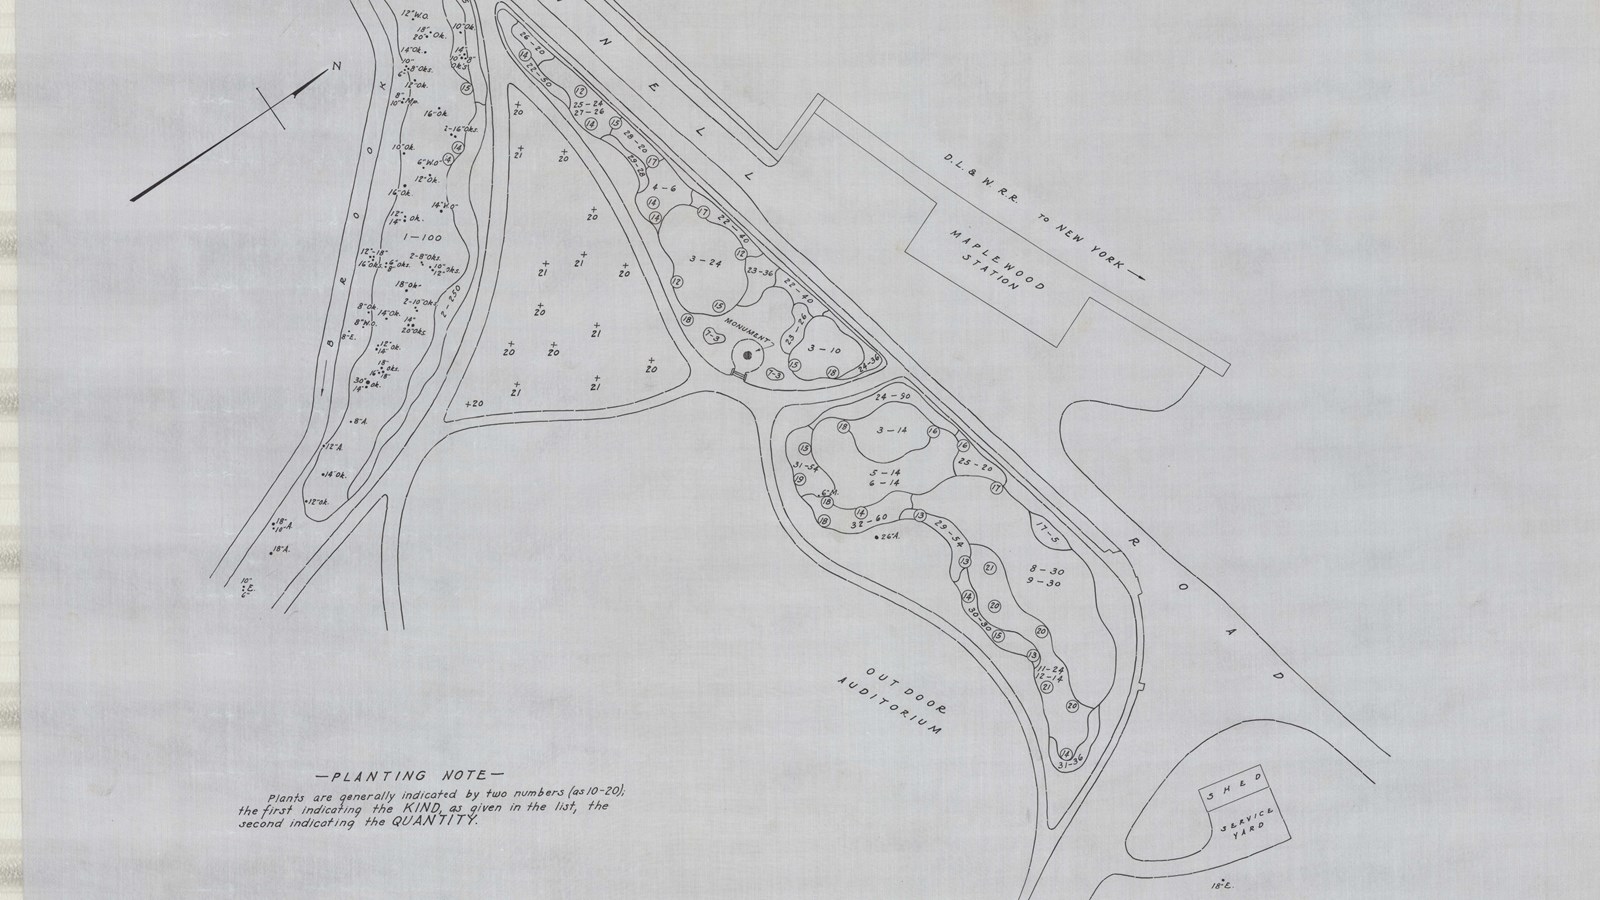 Pencil plan of park with numbers showing where to place plants